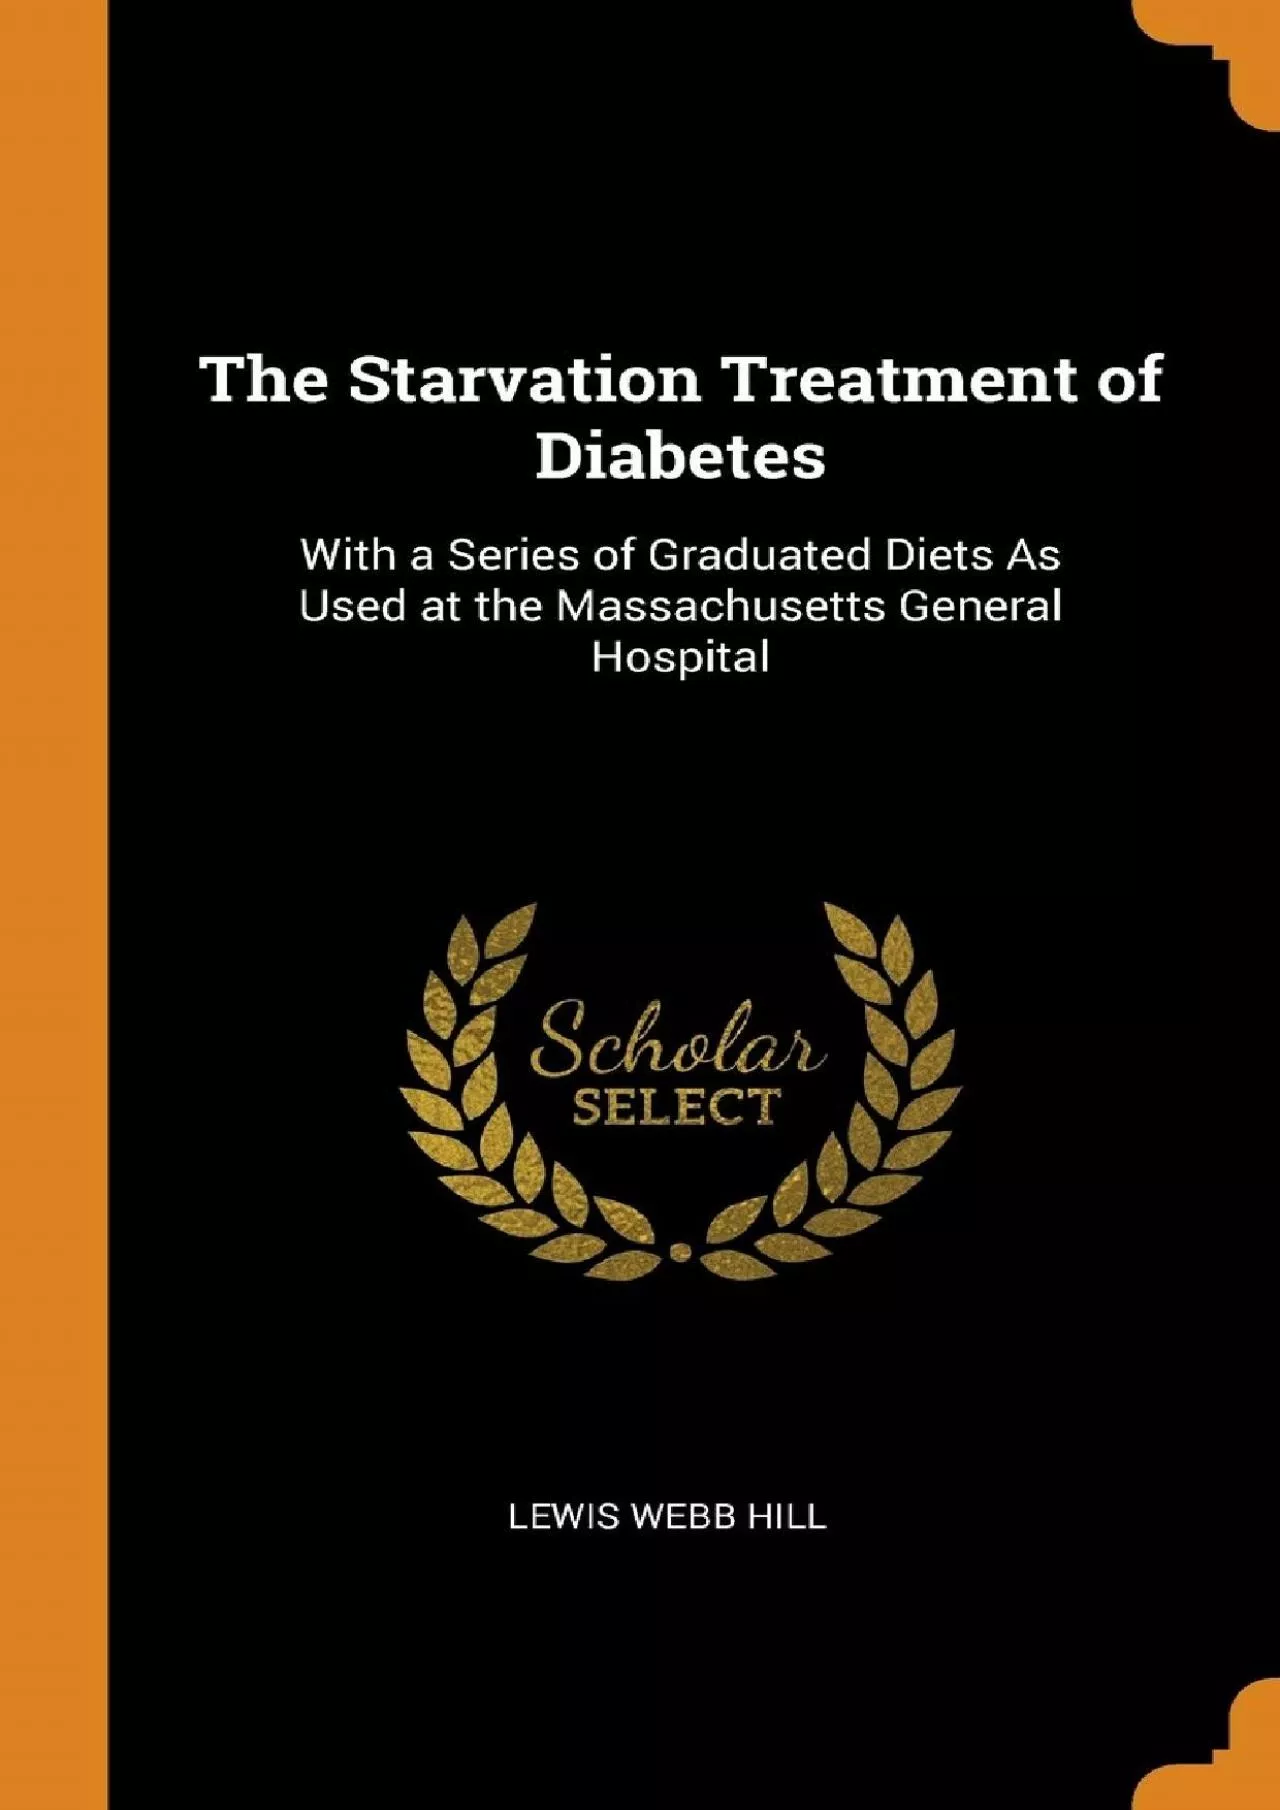 (BOOS)-The Starvation Treatment of Diabetes: With a Series of Graduated Diets As Used